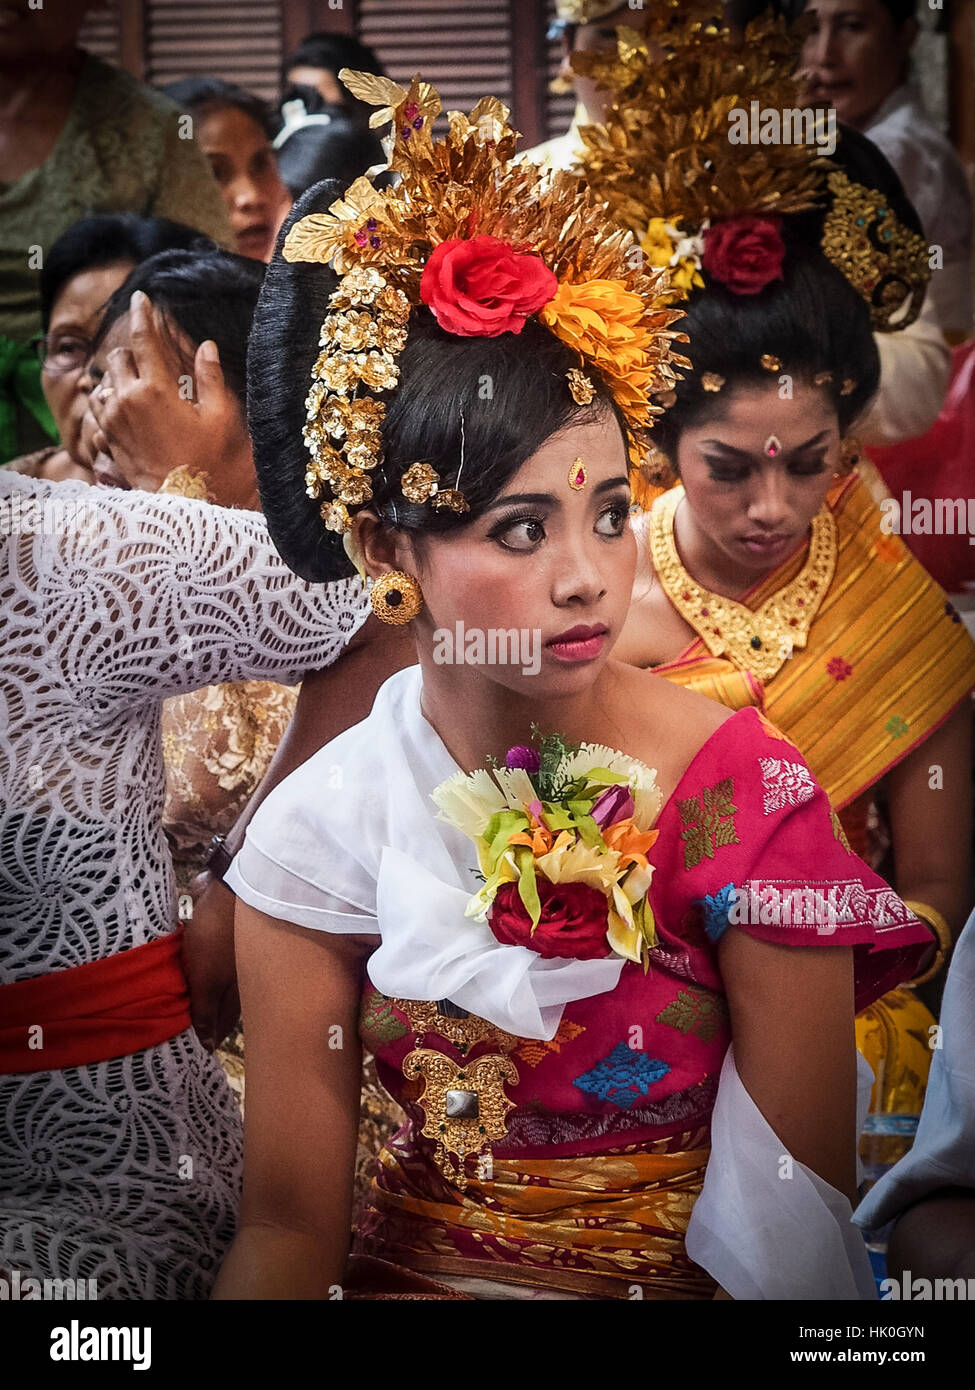 Girl awaiting tooth filing ceremony, Denpasar, Bali, Indonesia, Southeast Asia Stock Photo